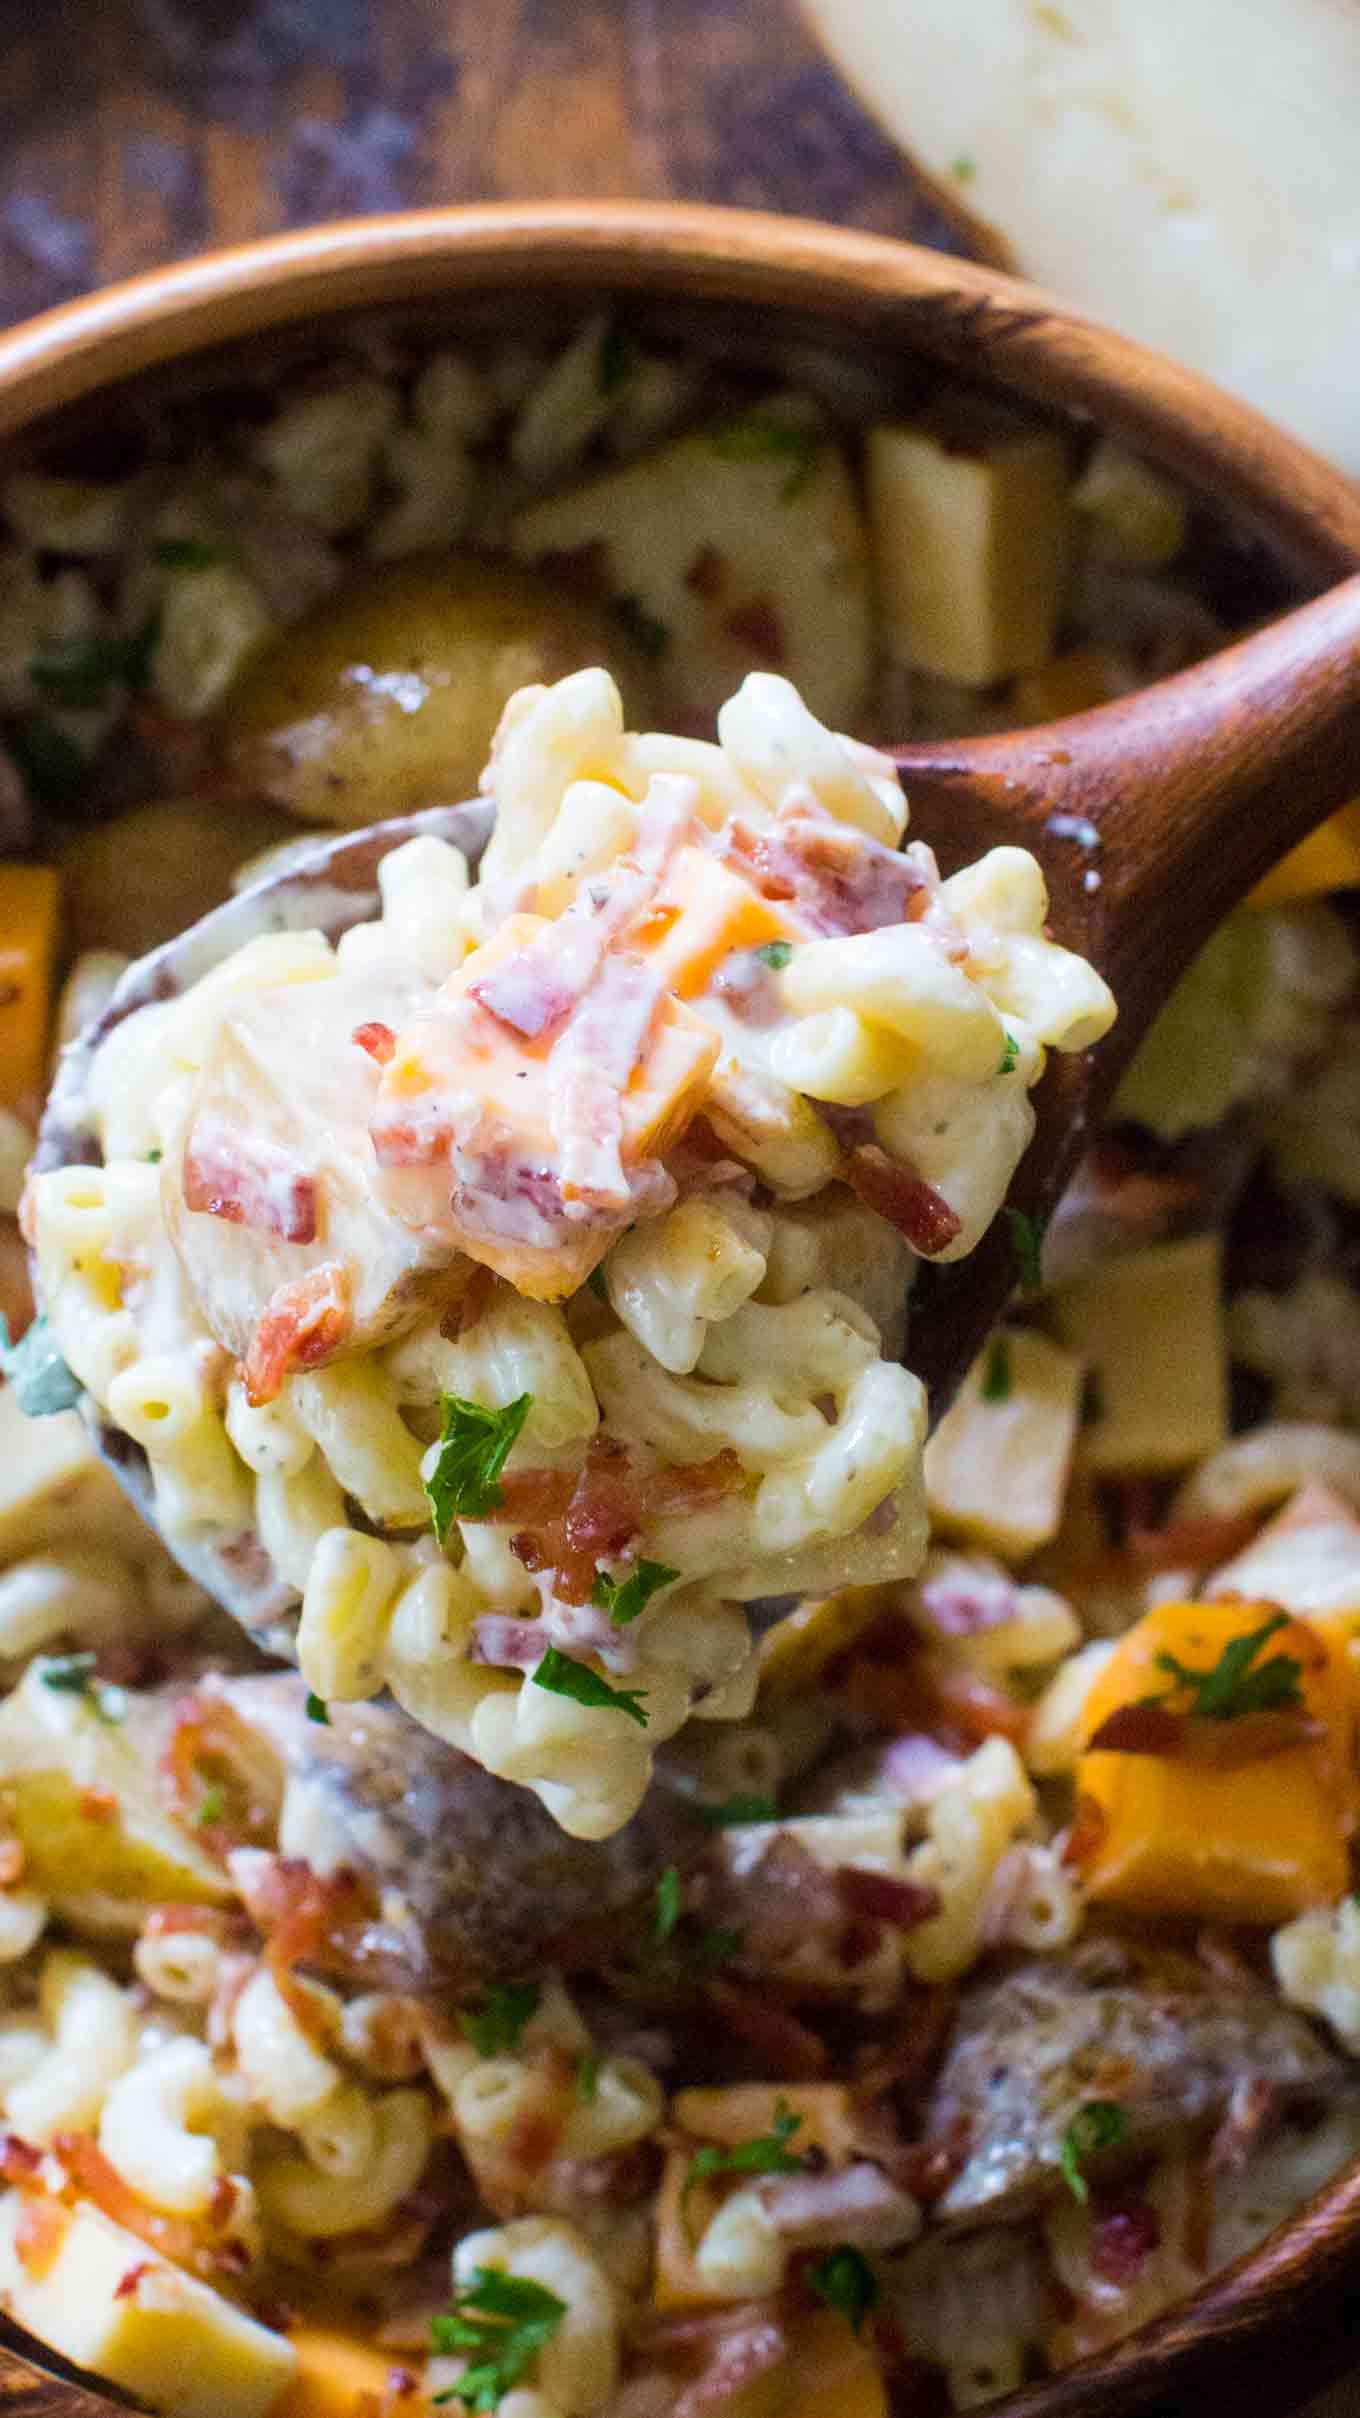 Best Loaded Baked Potato Salad is the perfect meal to bring to a potluck or to make for a party! Delicious, packed with baked potatoes, cheese and bacon!